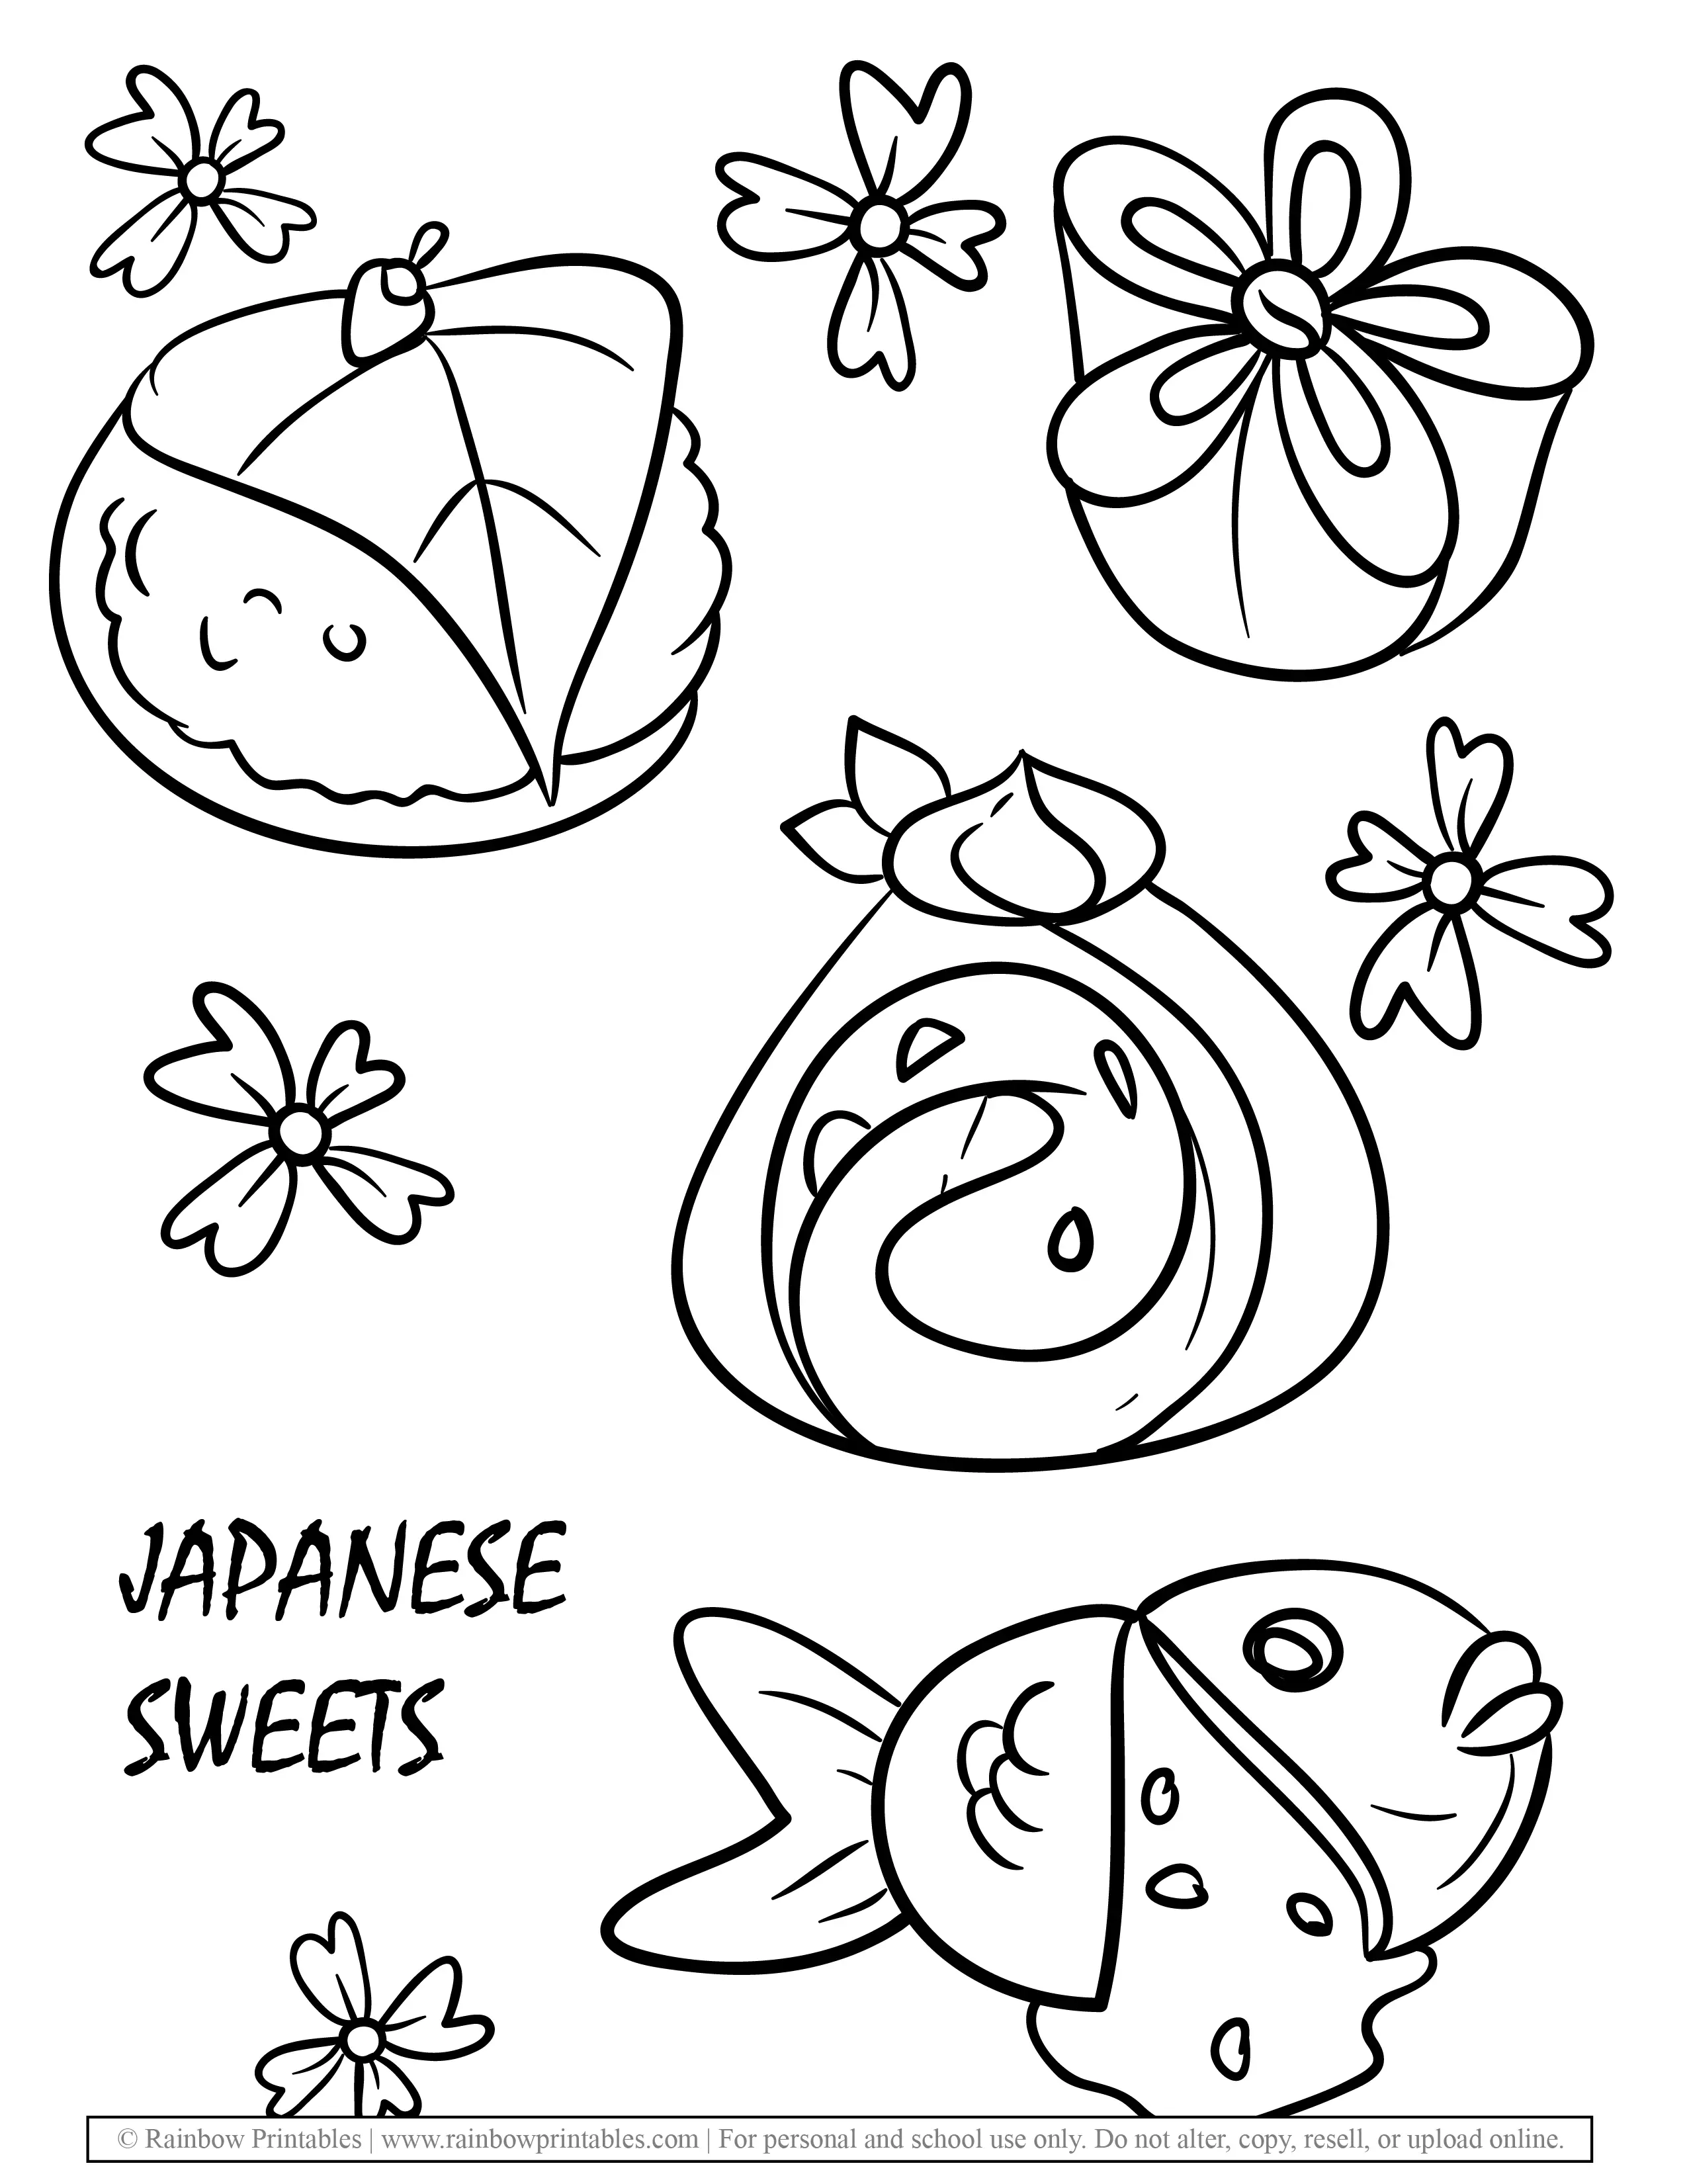 Japanese Sweets Taiyaki Dessert Yummy Coloring Pages for Kids Mochi